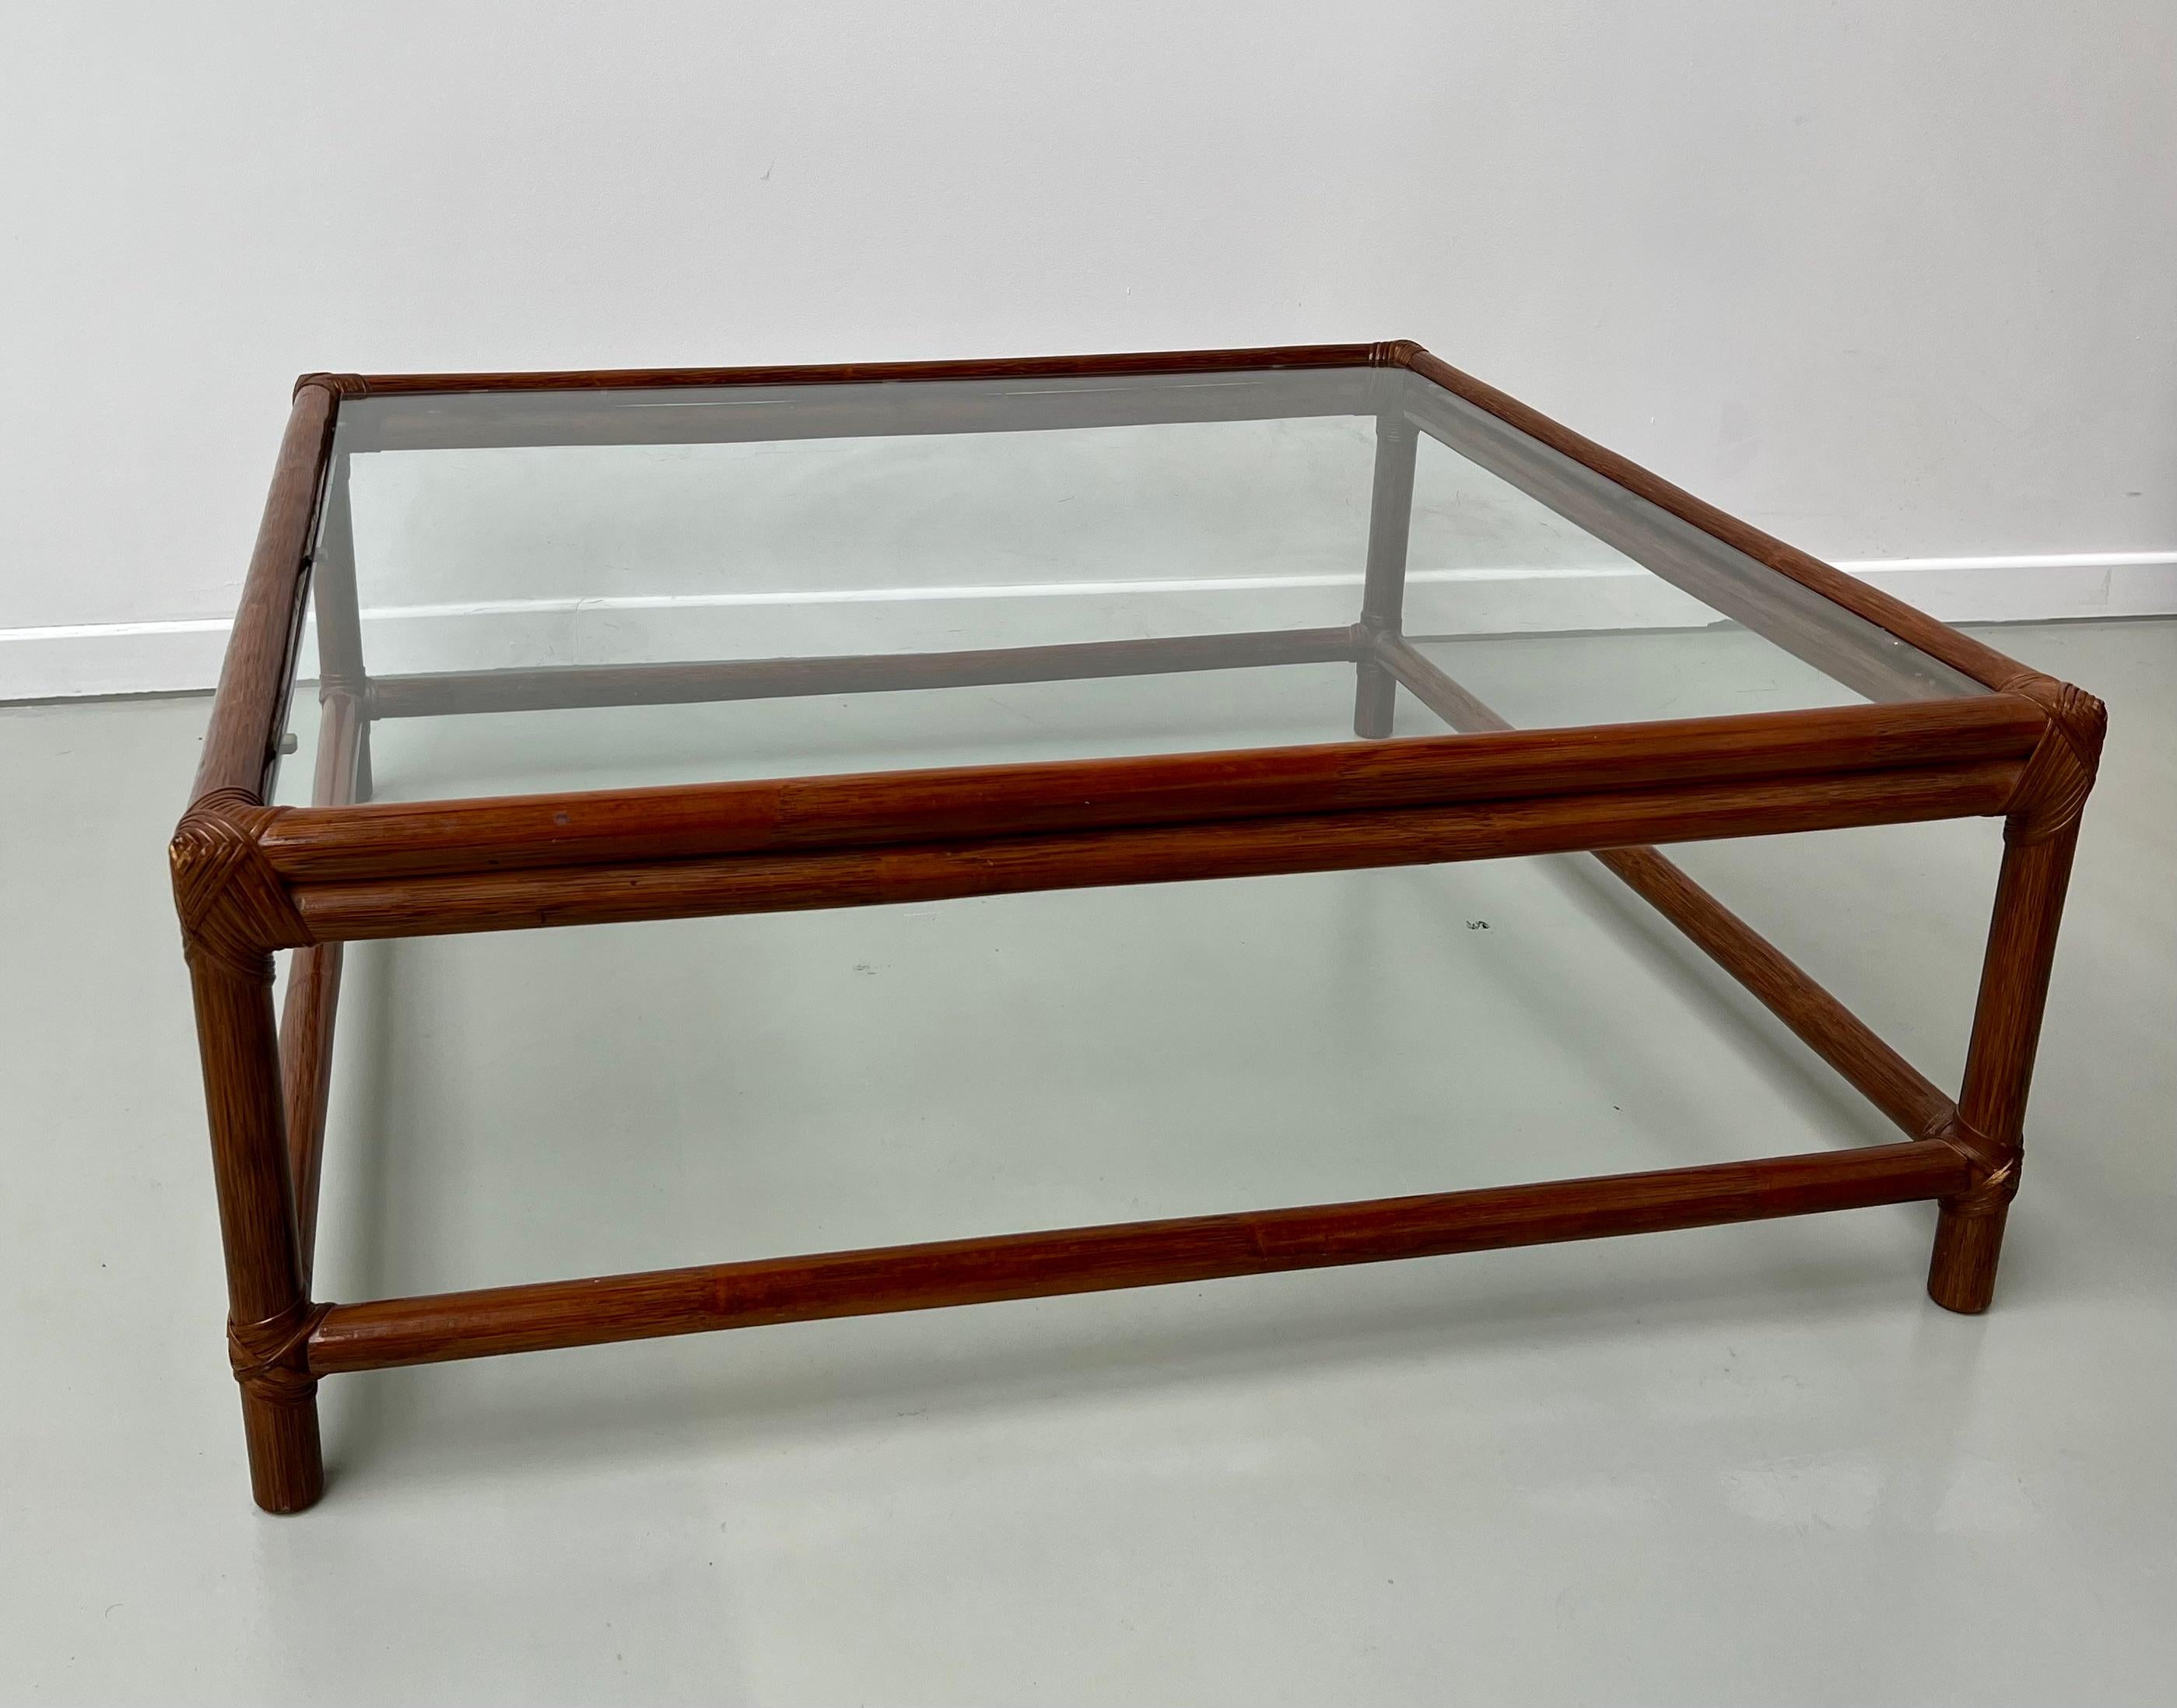 This superb coffee table is in very good vintage condition. Made by a craftsman in the 70s in France, its glass top rests on pretty period cleats. Highly decorative and furiously trendy with the cachet of a 70s piece.